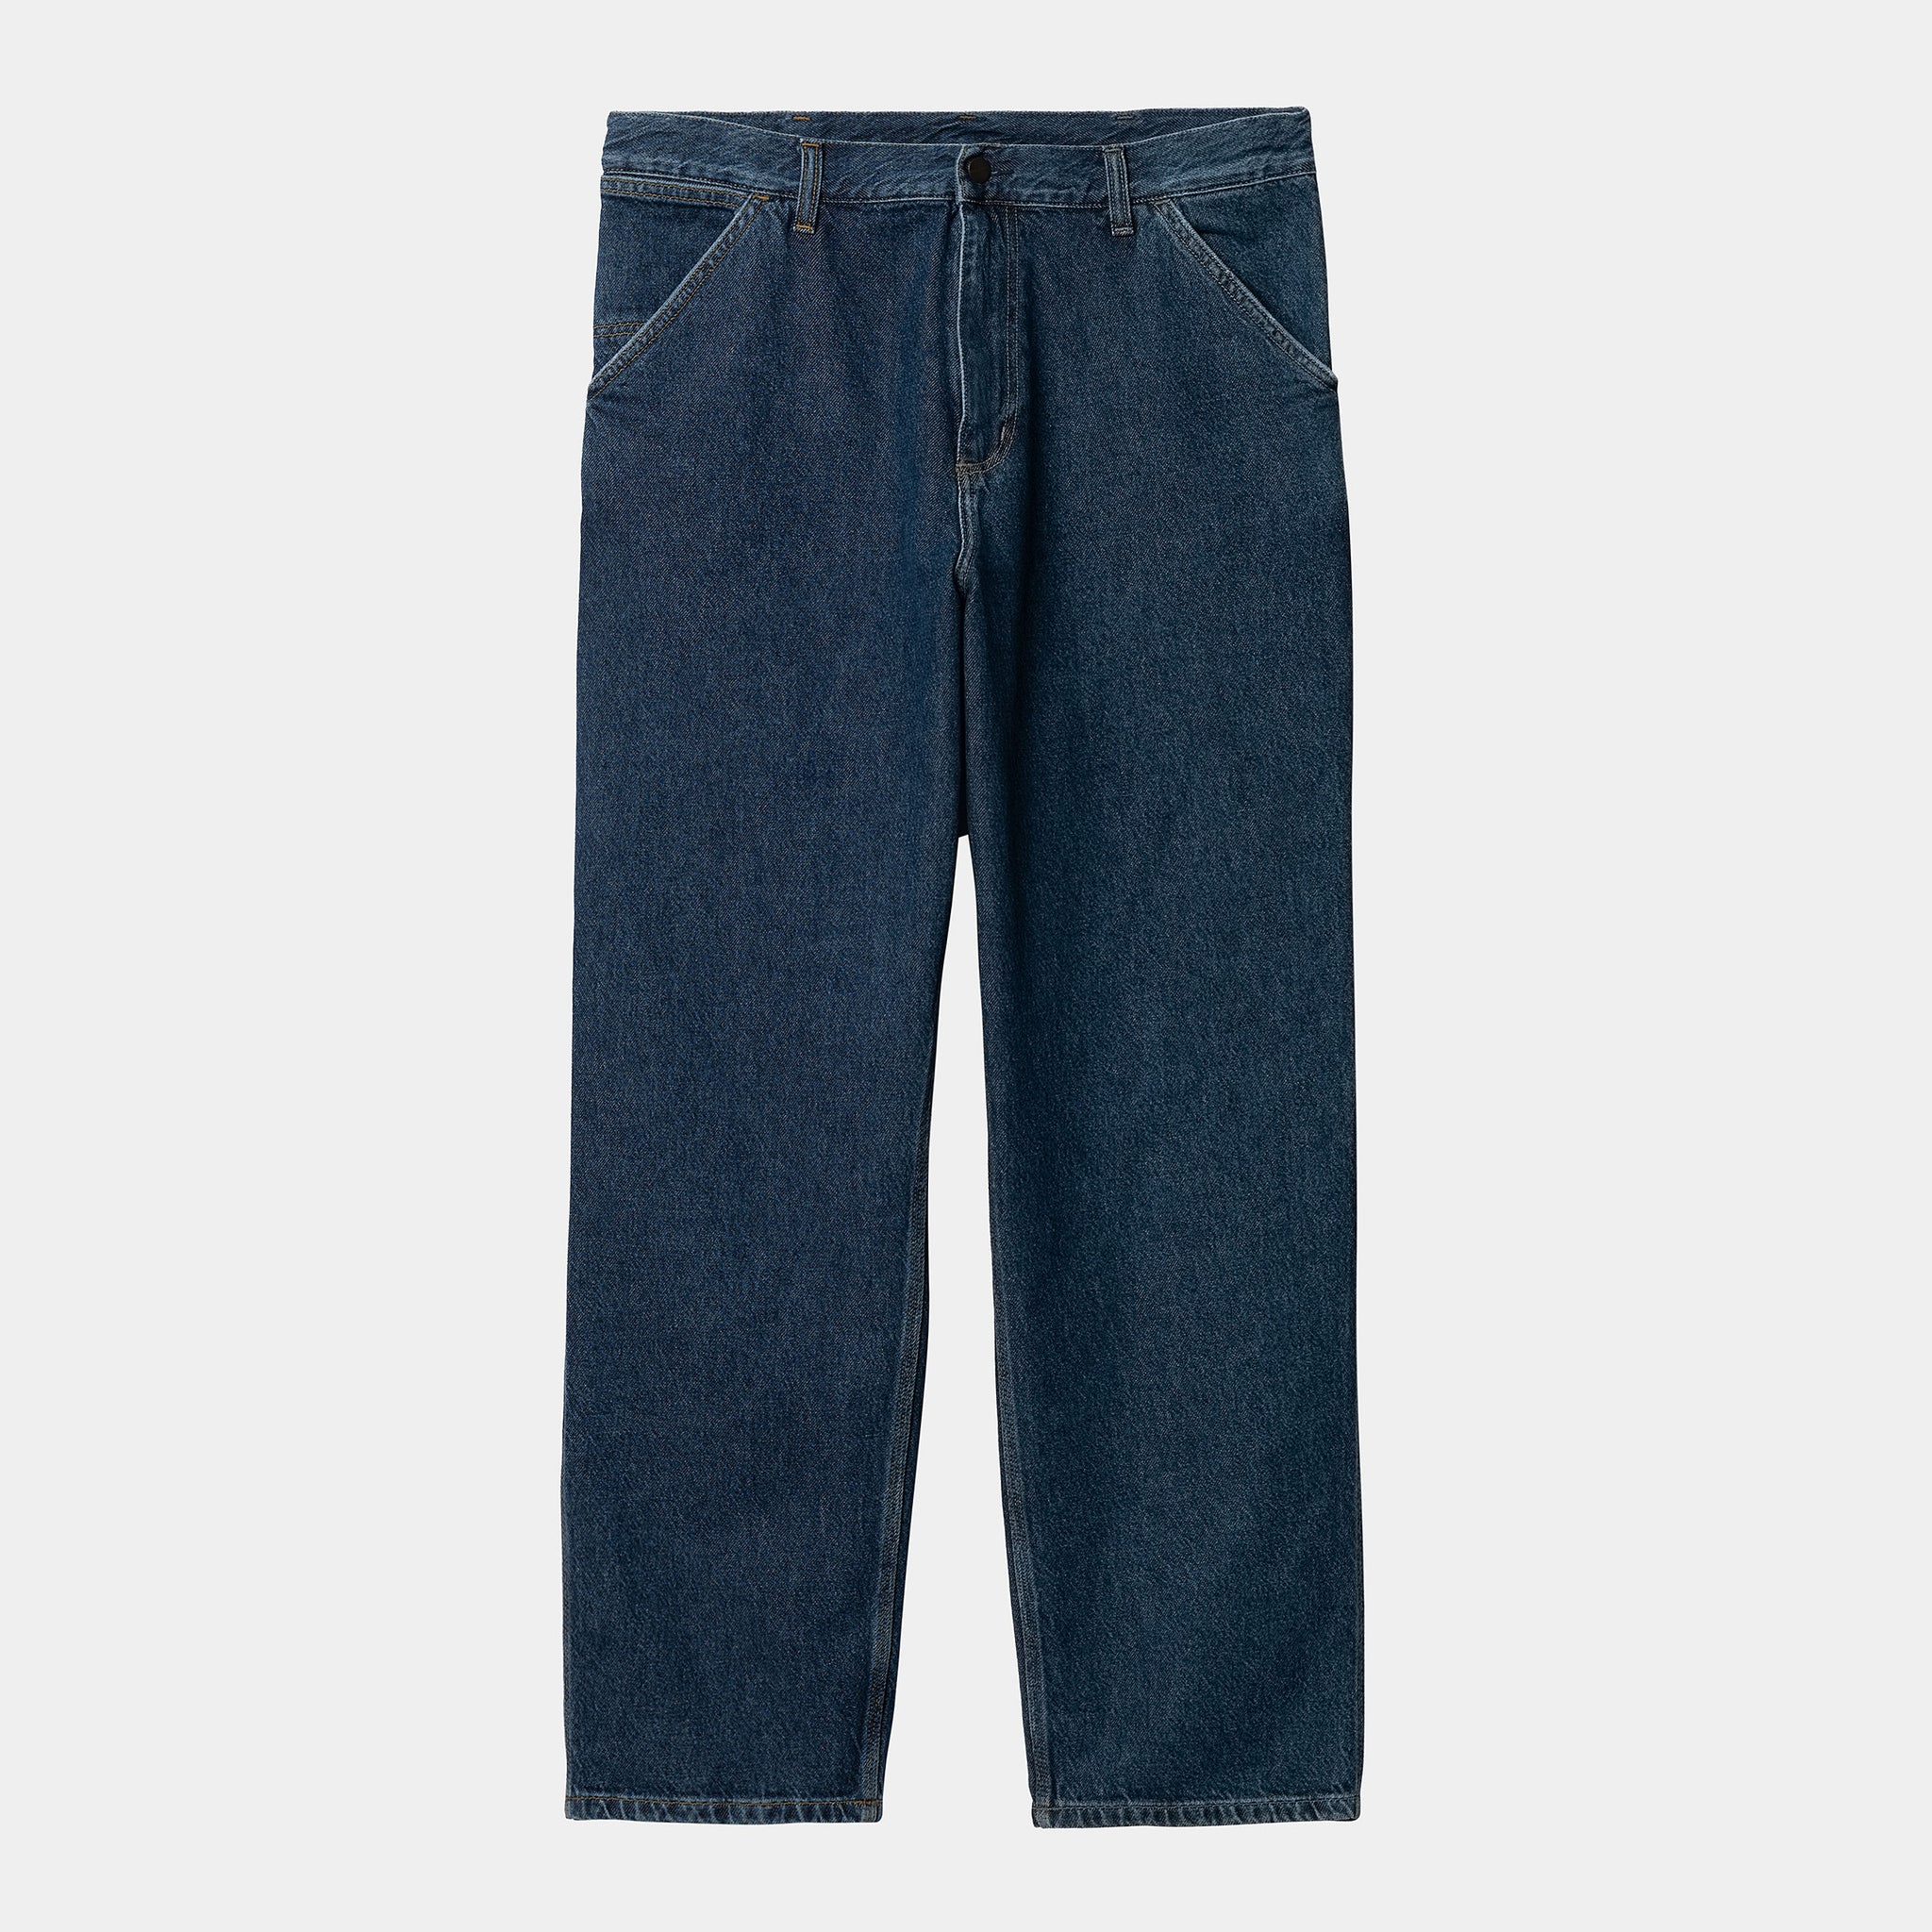 Carhartt WIP Single Knee Pant L32 (Blue stone washed)